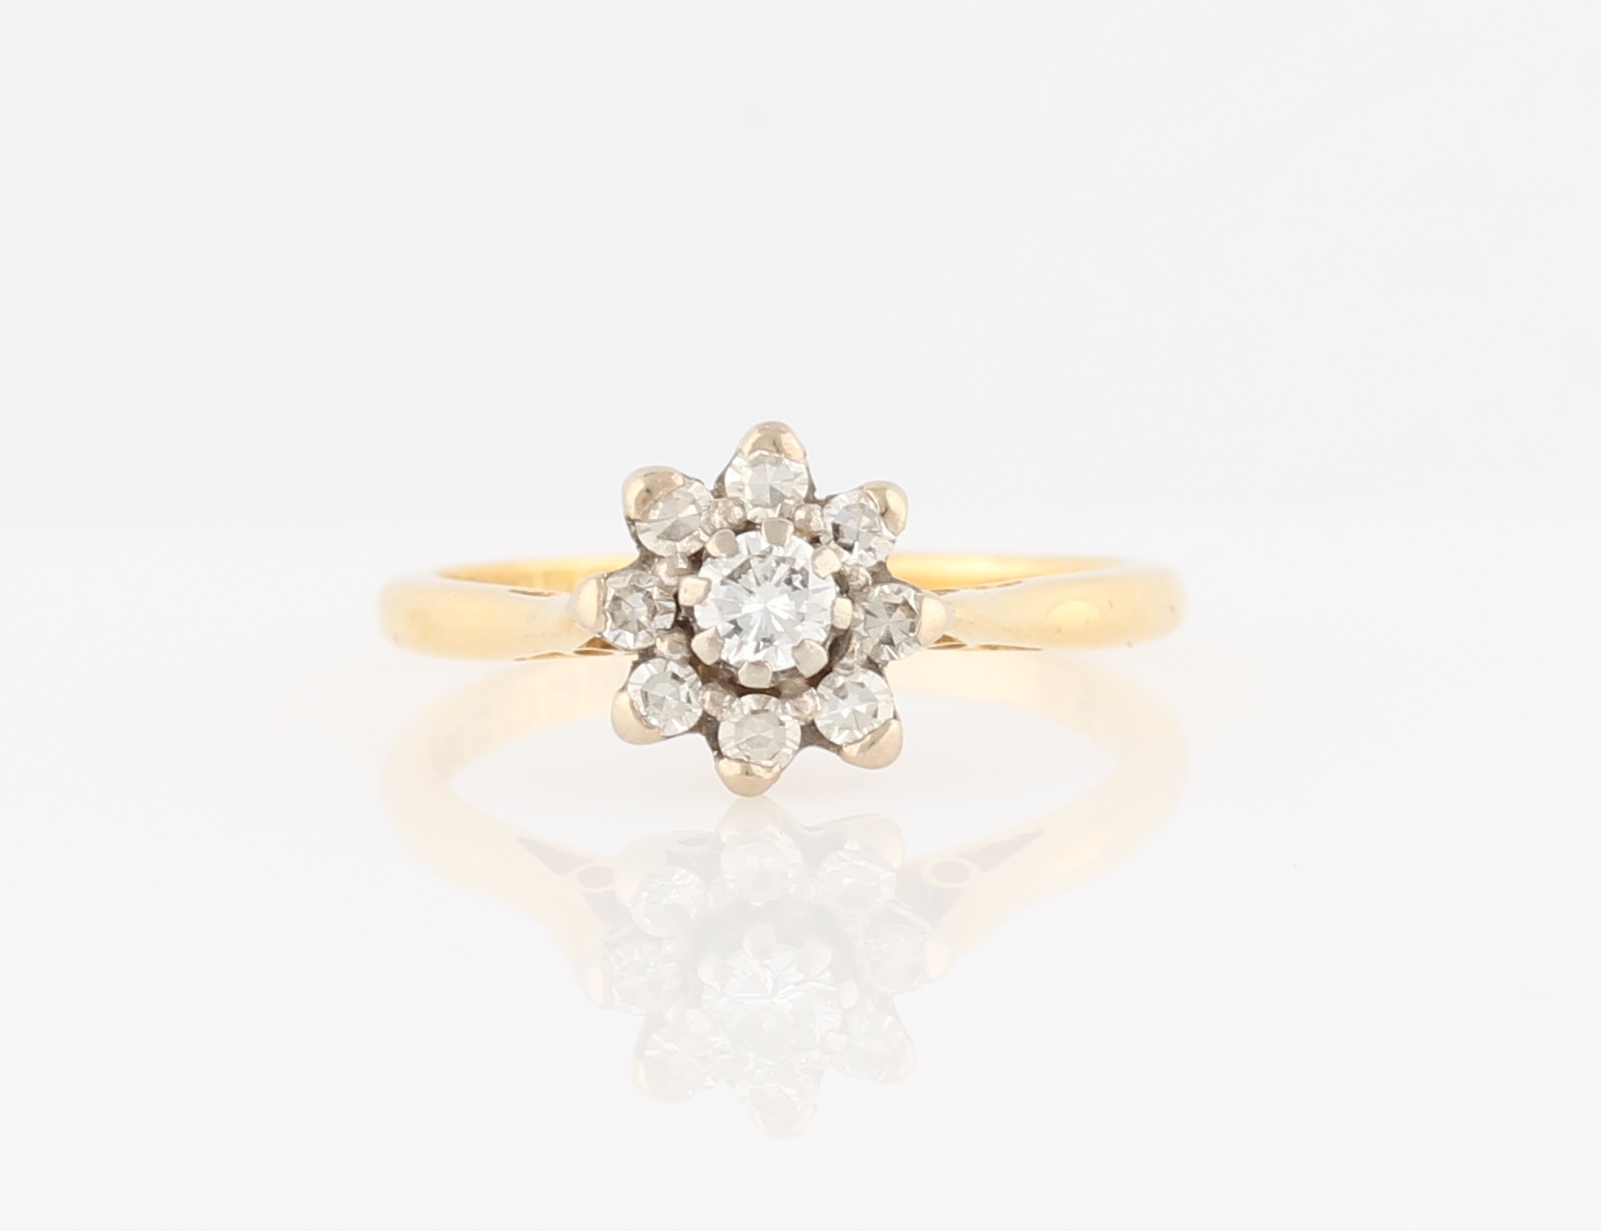 An 18ct yellow gold diamond flower design ring, set with a central round brilliant cut diamond